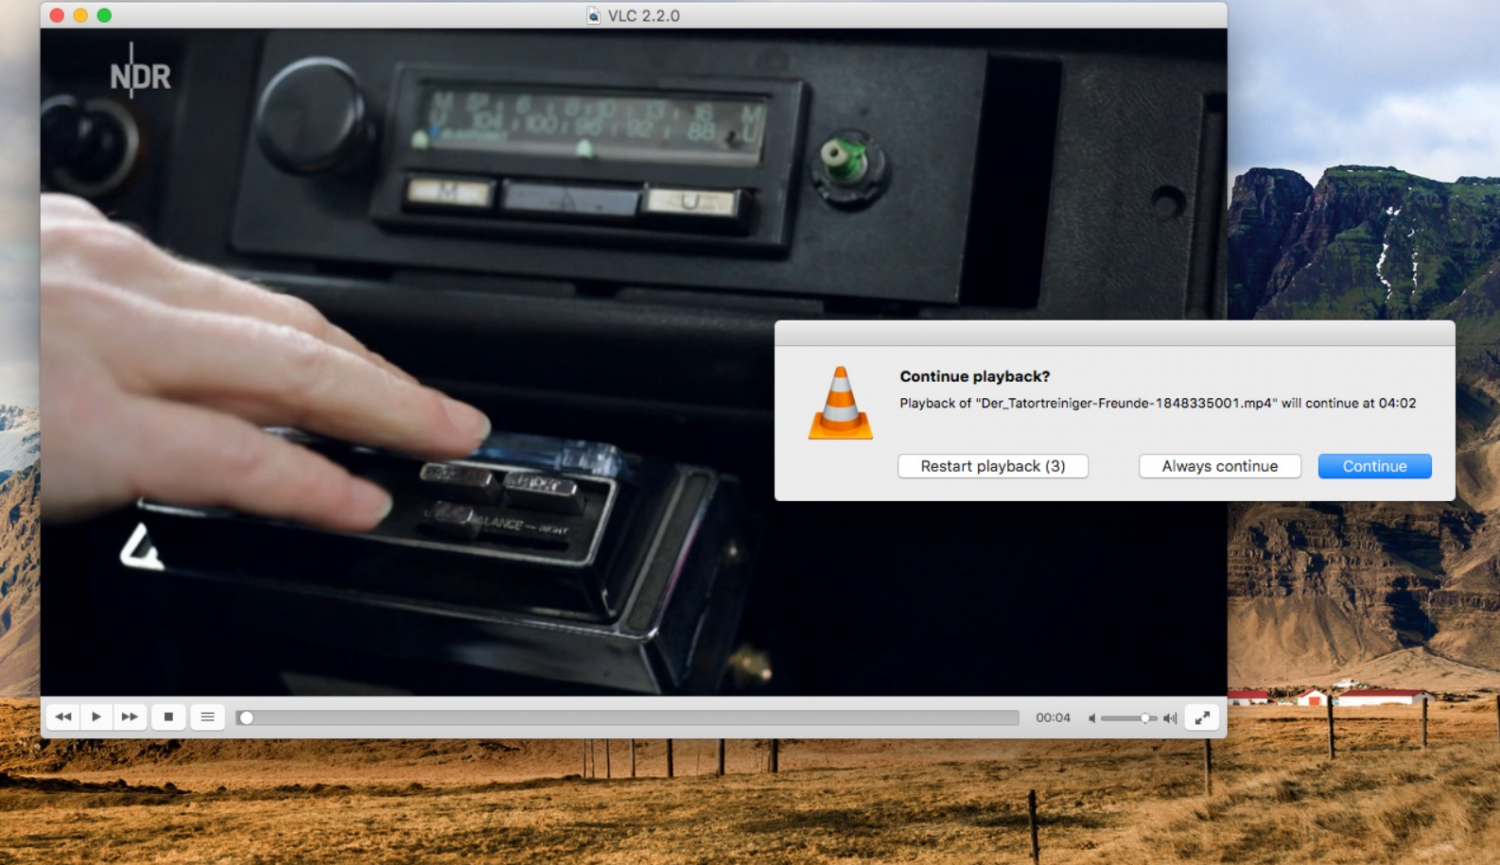 VideoLAN Brings Updates to New VLC Media Player 